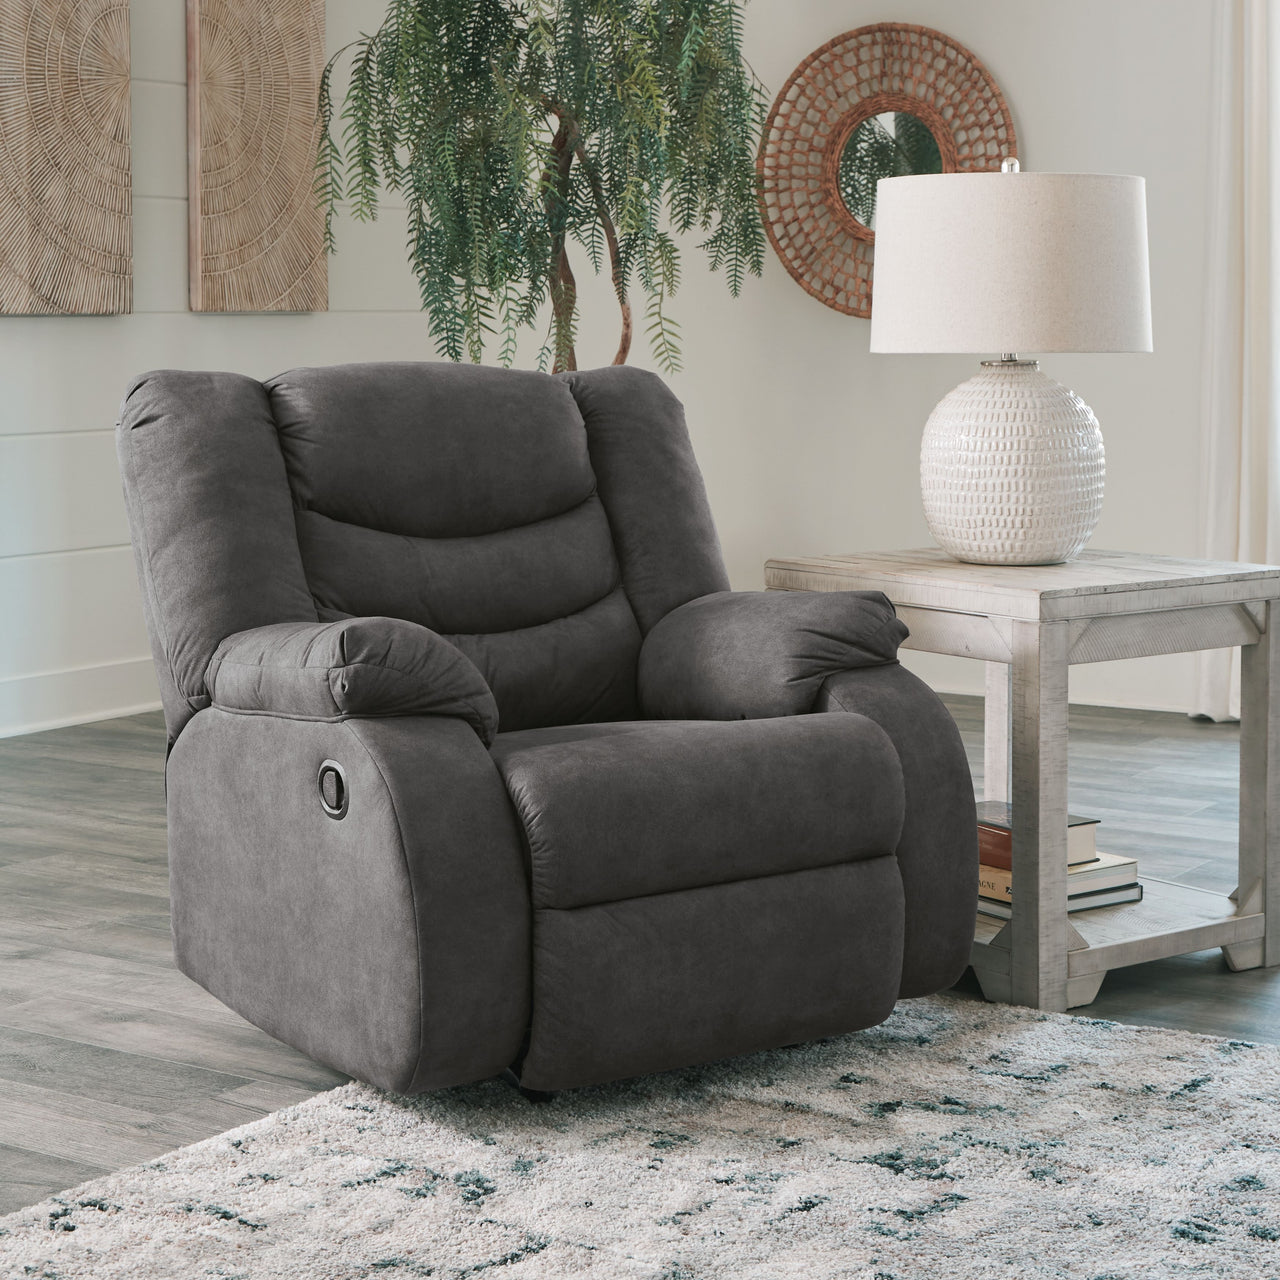 Partymate - Reclining Living Room Set - Tony's Home Furnishings